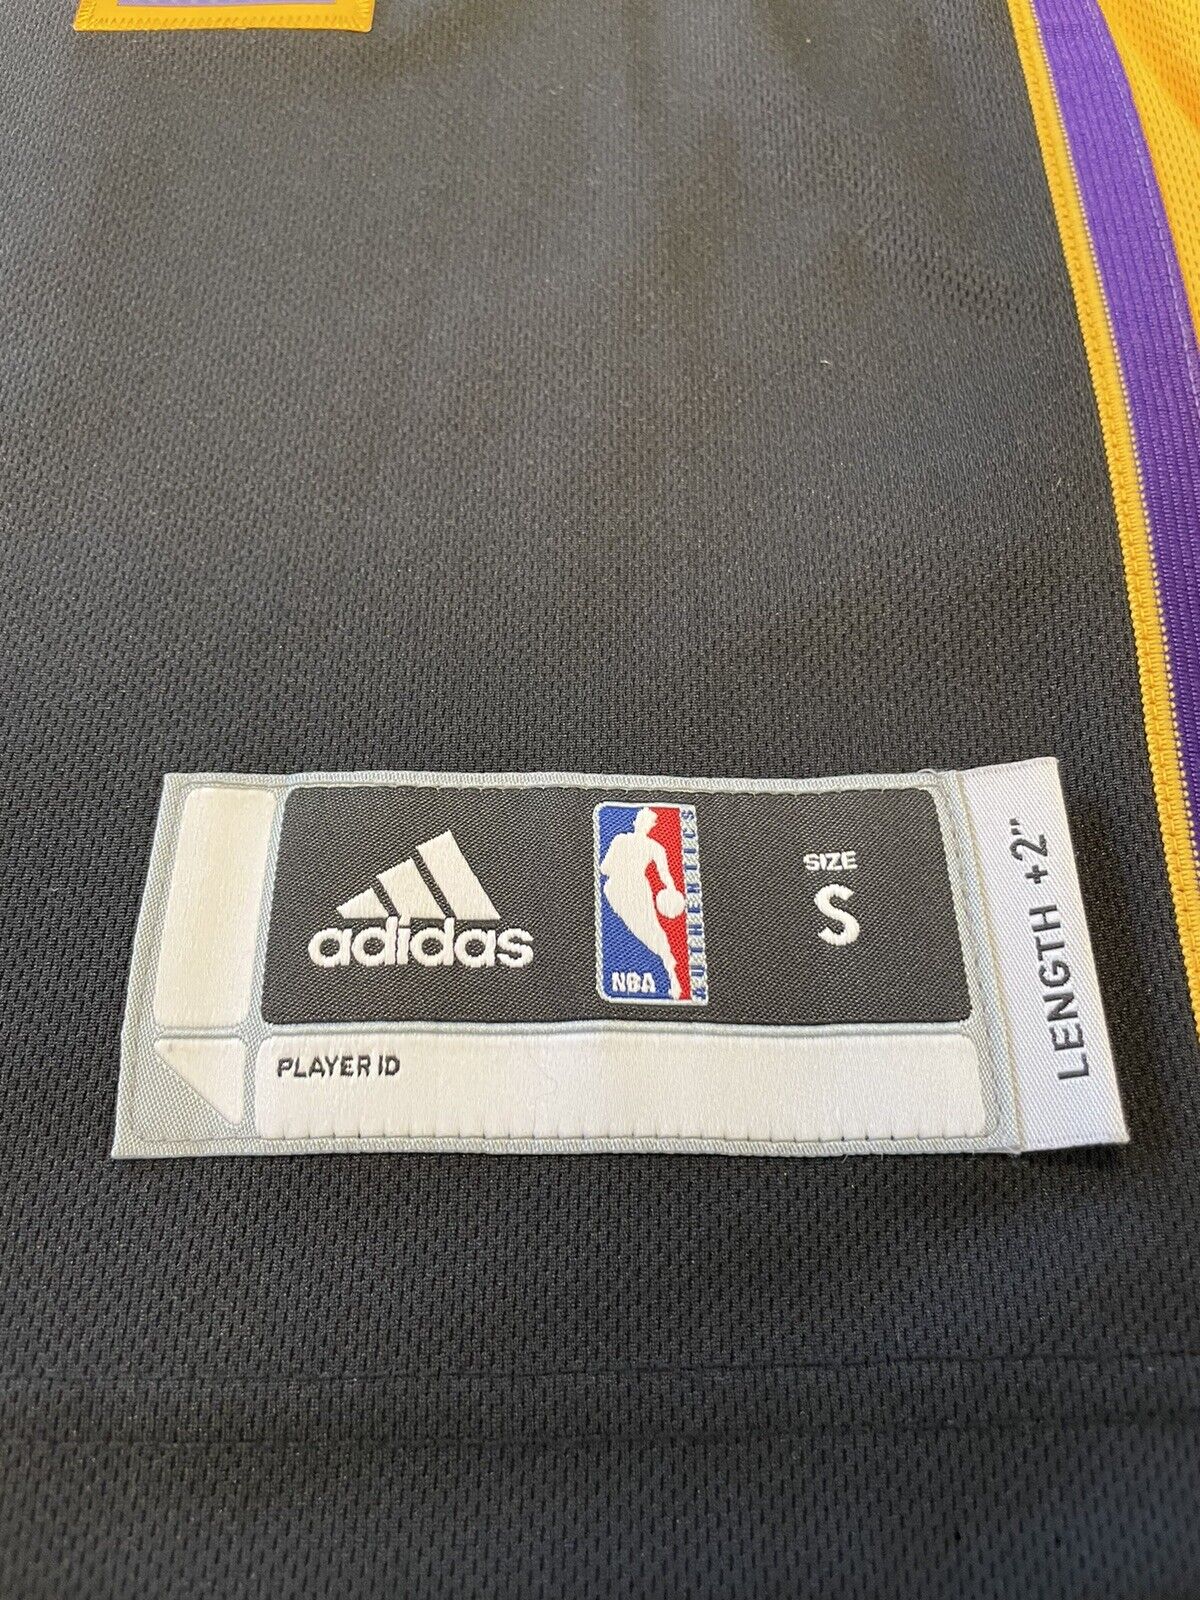 Hollywood nights jersey is the best jersey : r/lakers